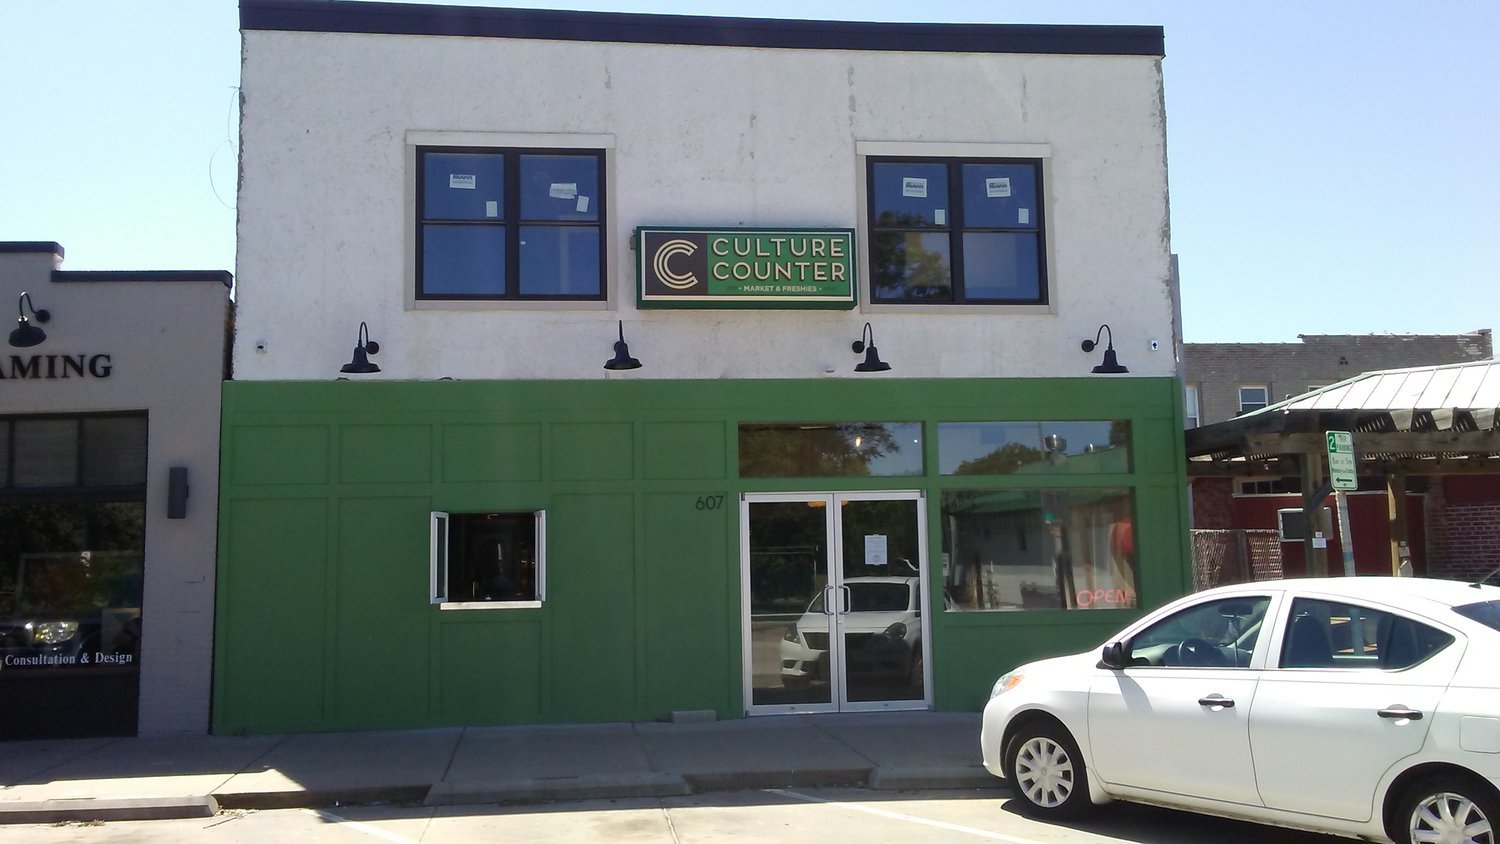 Culture Counter opened at 607 E. Pickwick Ave. in the Rountree neighborhood in 2020.